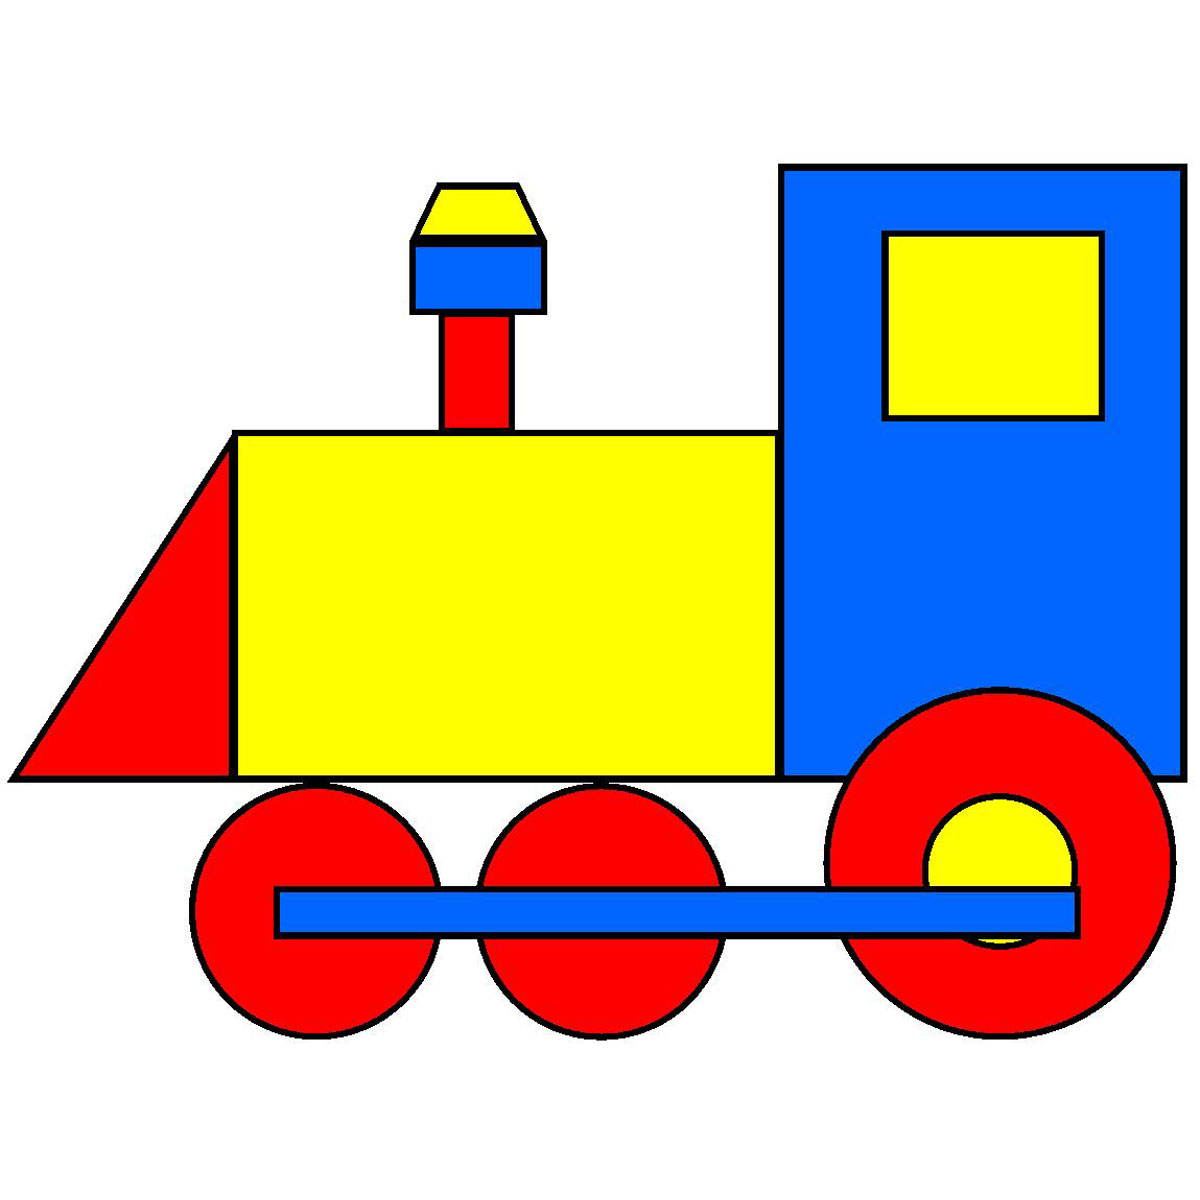 Train Clipart Black And White | Clipart Panda - Free Clipart Images